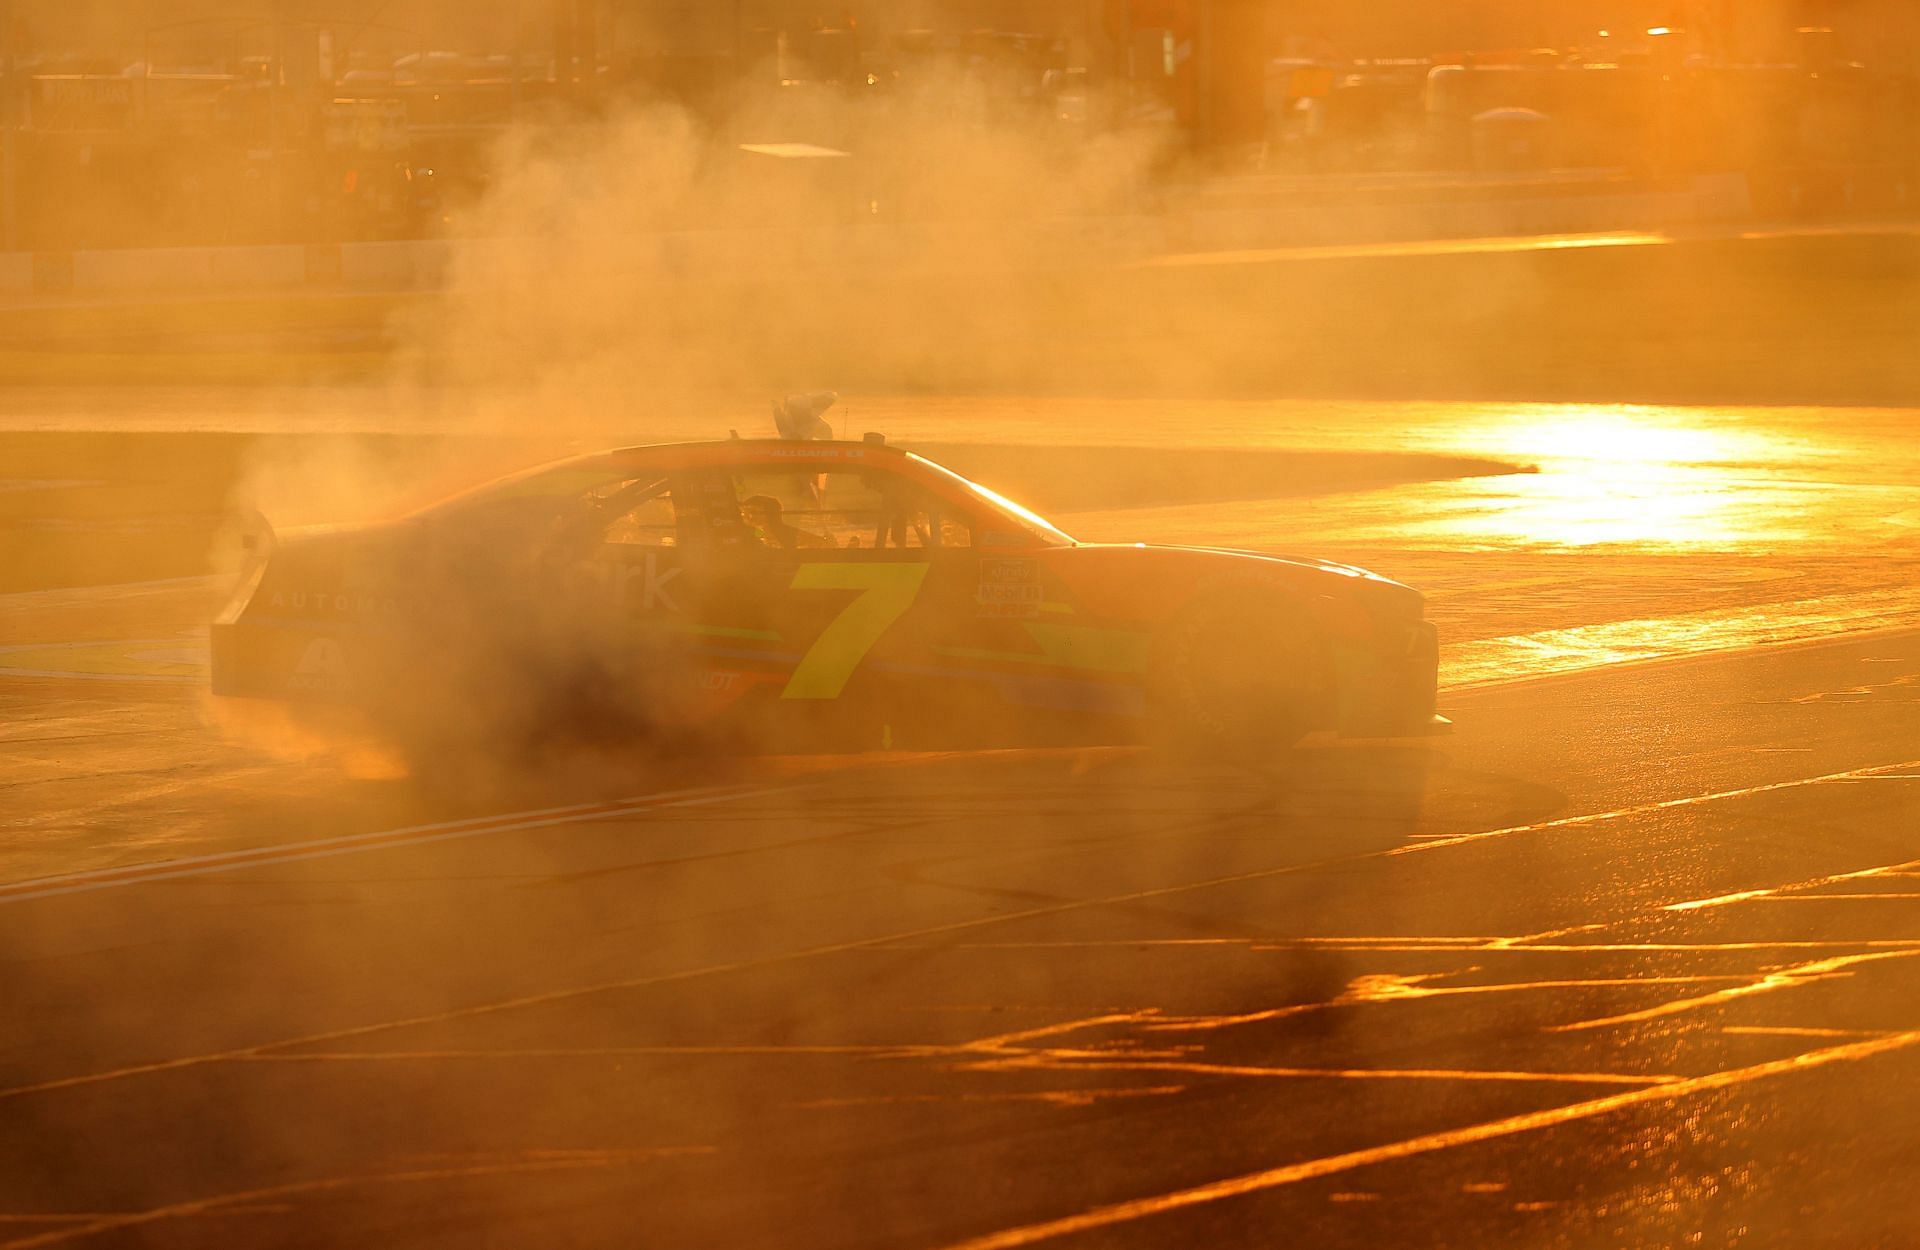 Justin Allgaier celebrates with a burnout after winning the NASCAR Xfinity Series EchoPark 250 at Atlanta Motor Speedway in 2021 (Photo by Kevin C. Cox/Getty Images)